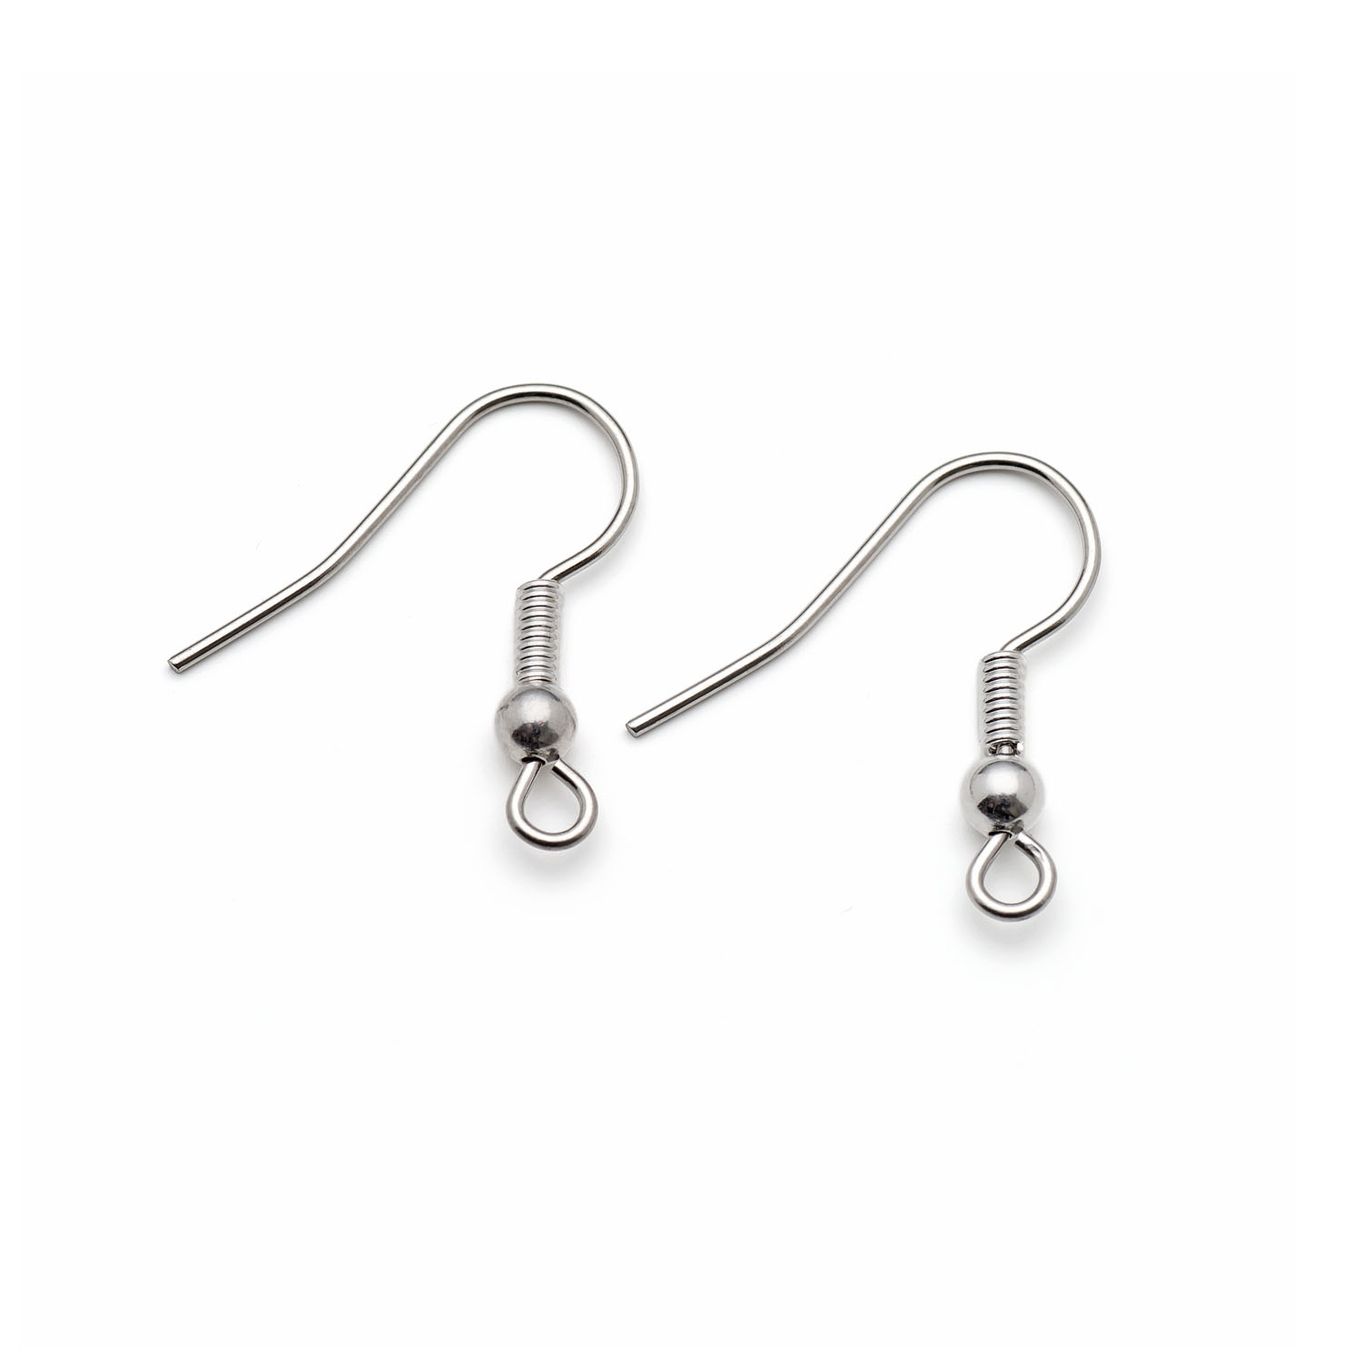 Surgical Steel Shepherds Crook Earwires with Silver Plated Ball and Spring - Pack of 10 Pairs